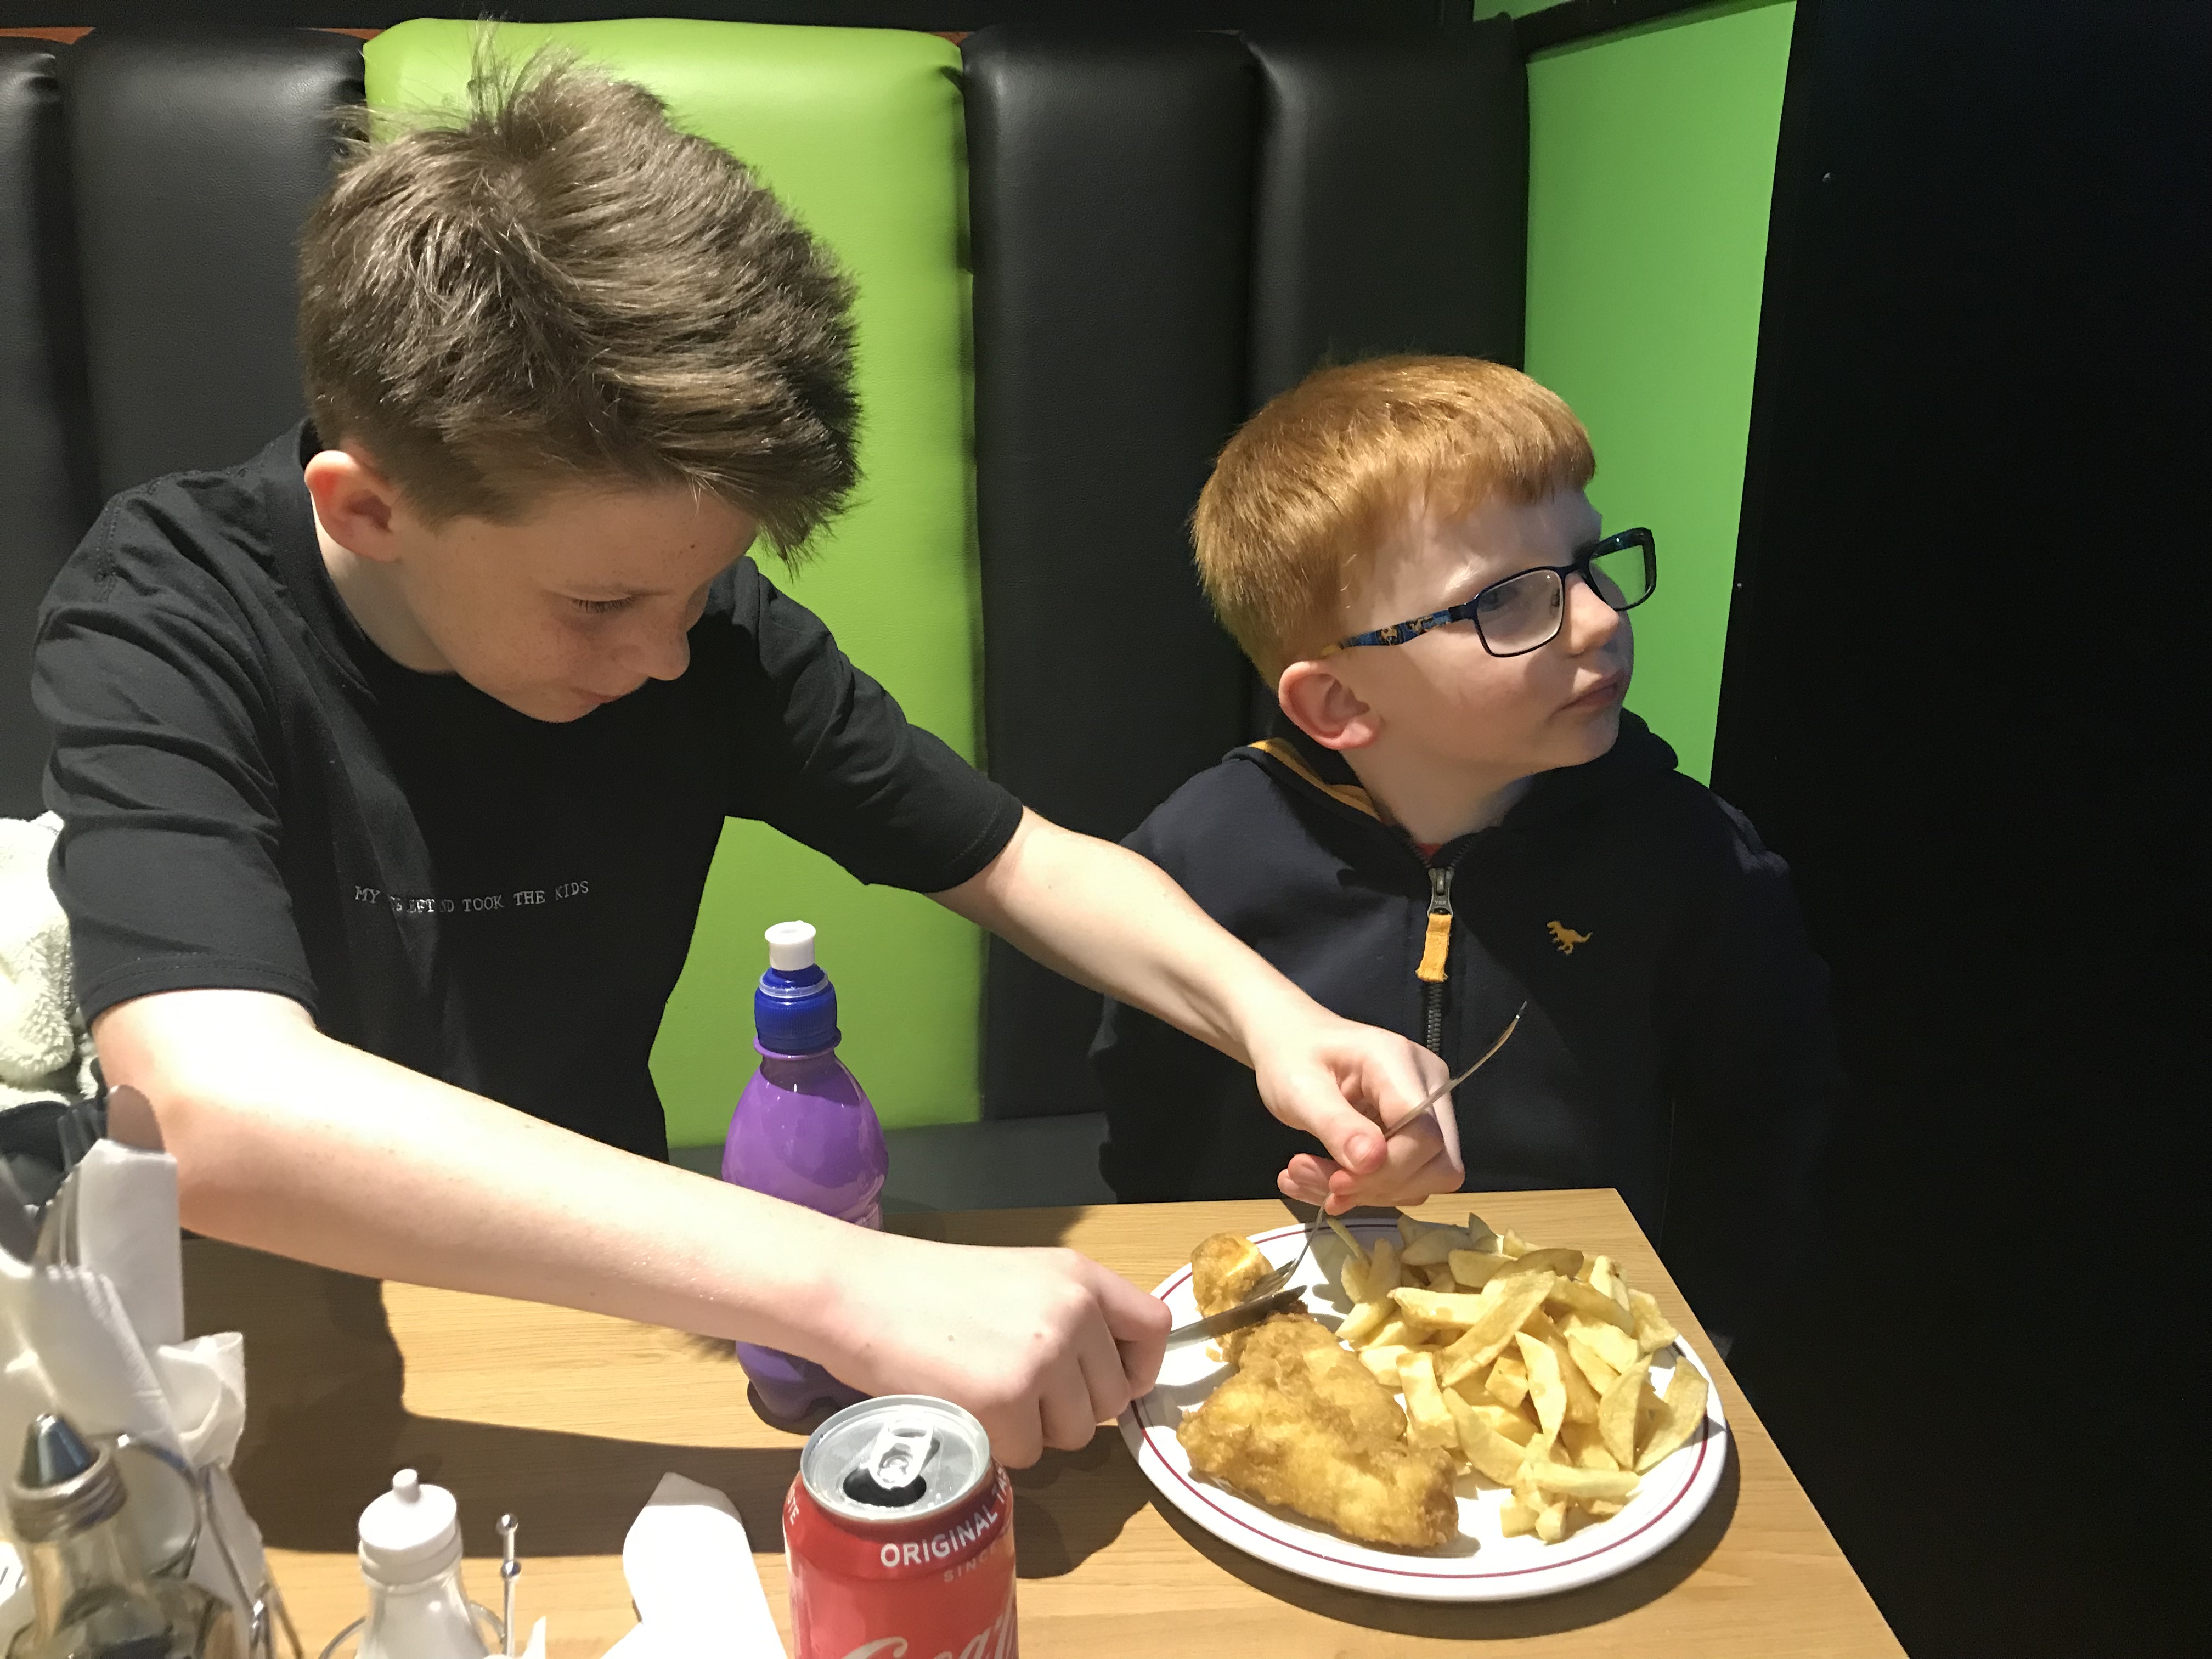 Alfie helps William with his Fish & Chips - Wooler, Northumberland April 2019